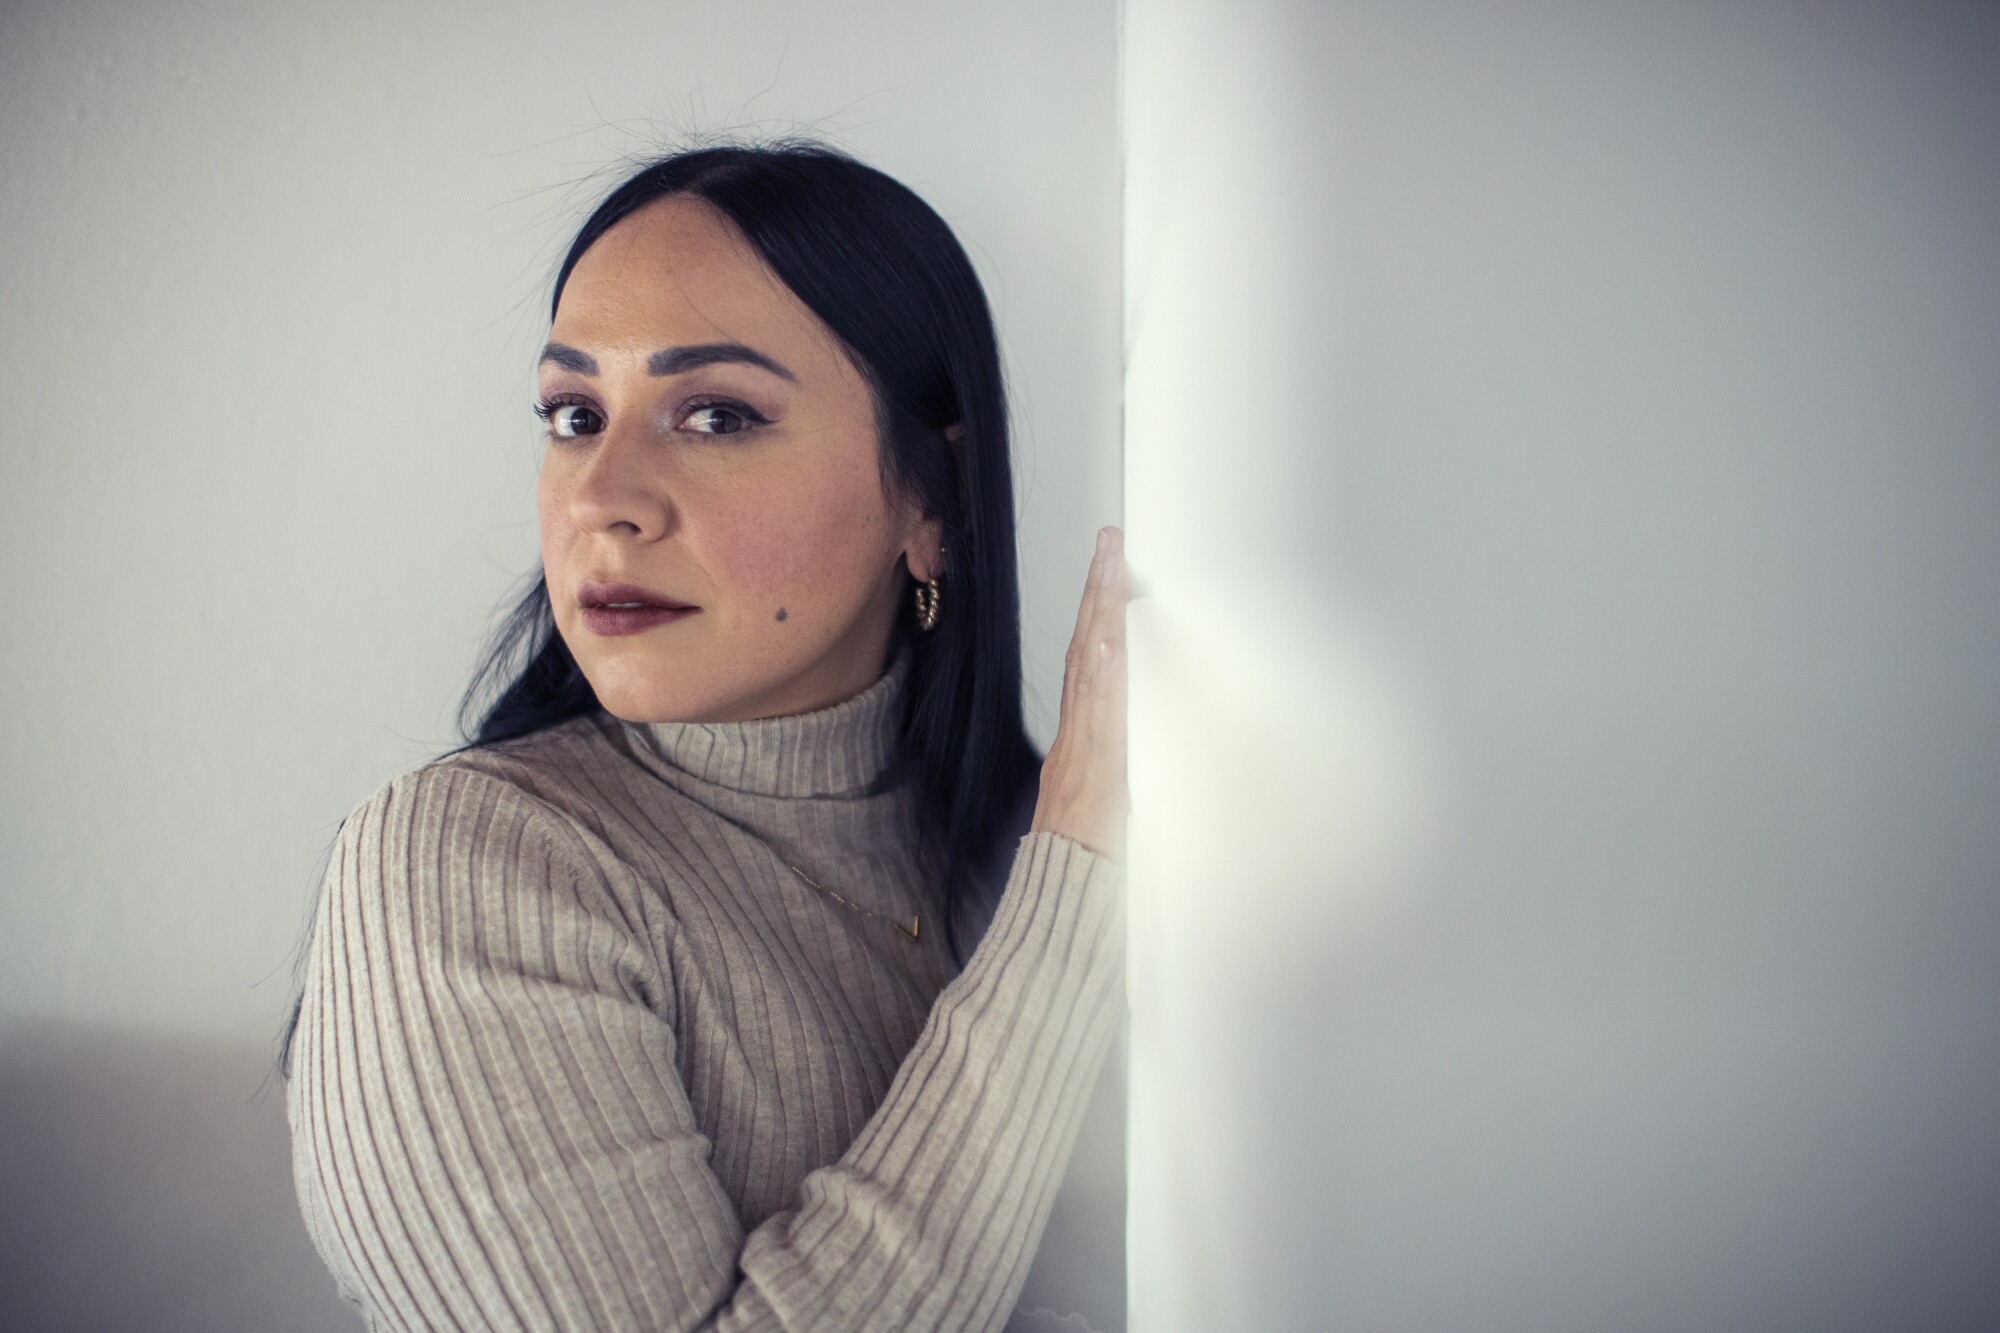 A portrait of Mexican singer-songwriter Carla Morrison